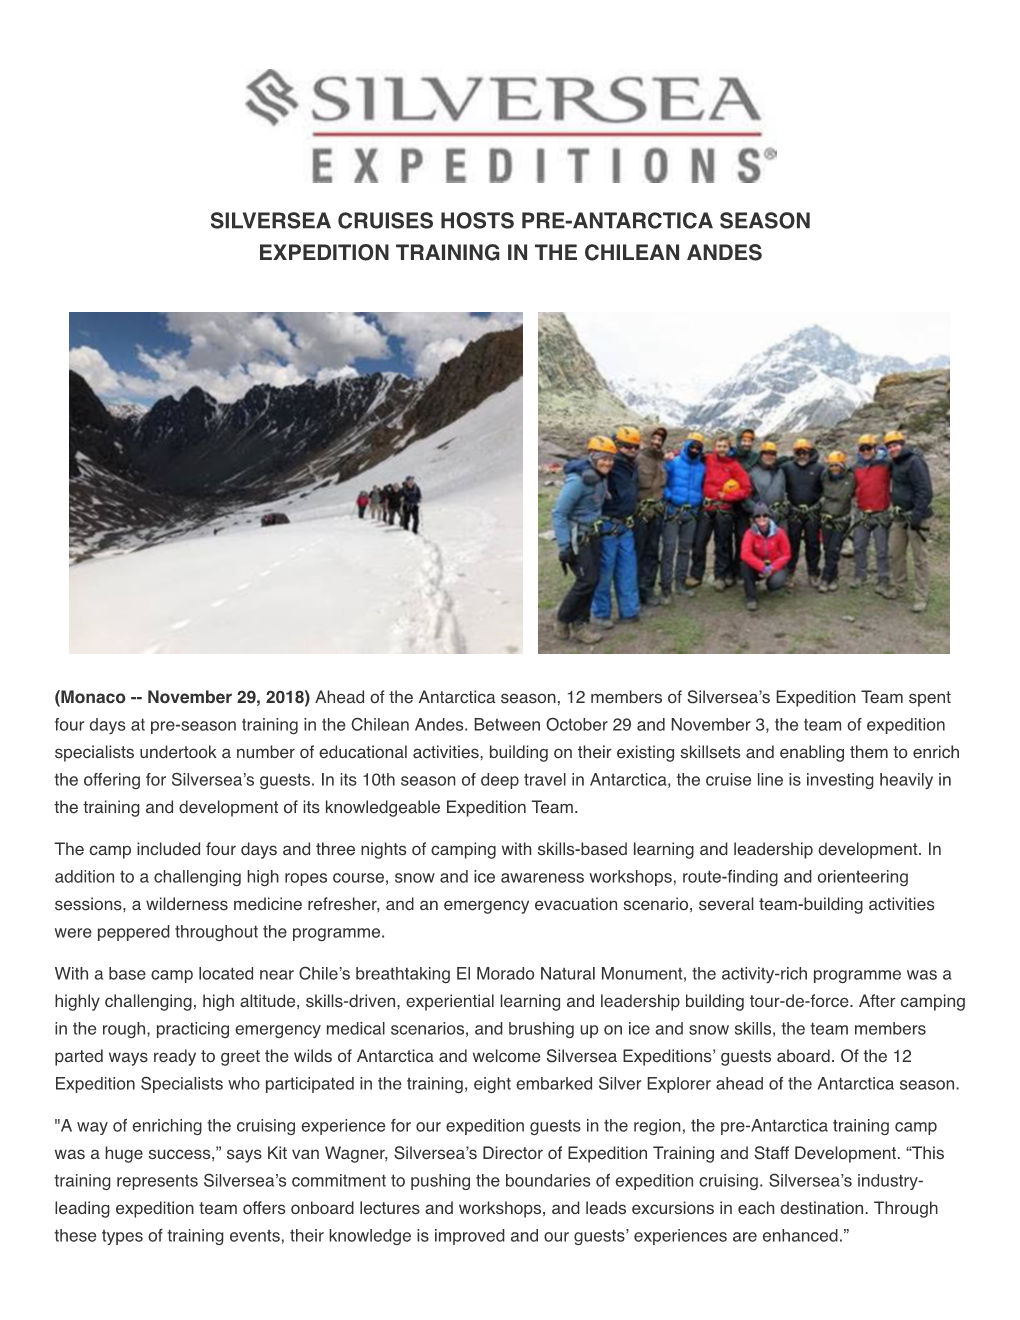 Silversea Cruises Hosts Pre-Antarctica Season Expedition Training in the Chilean Andes